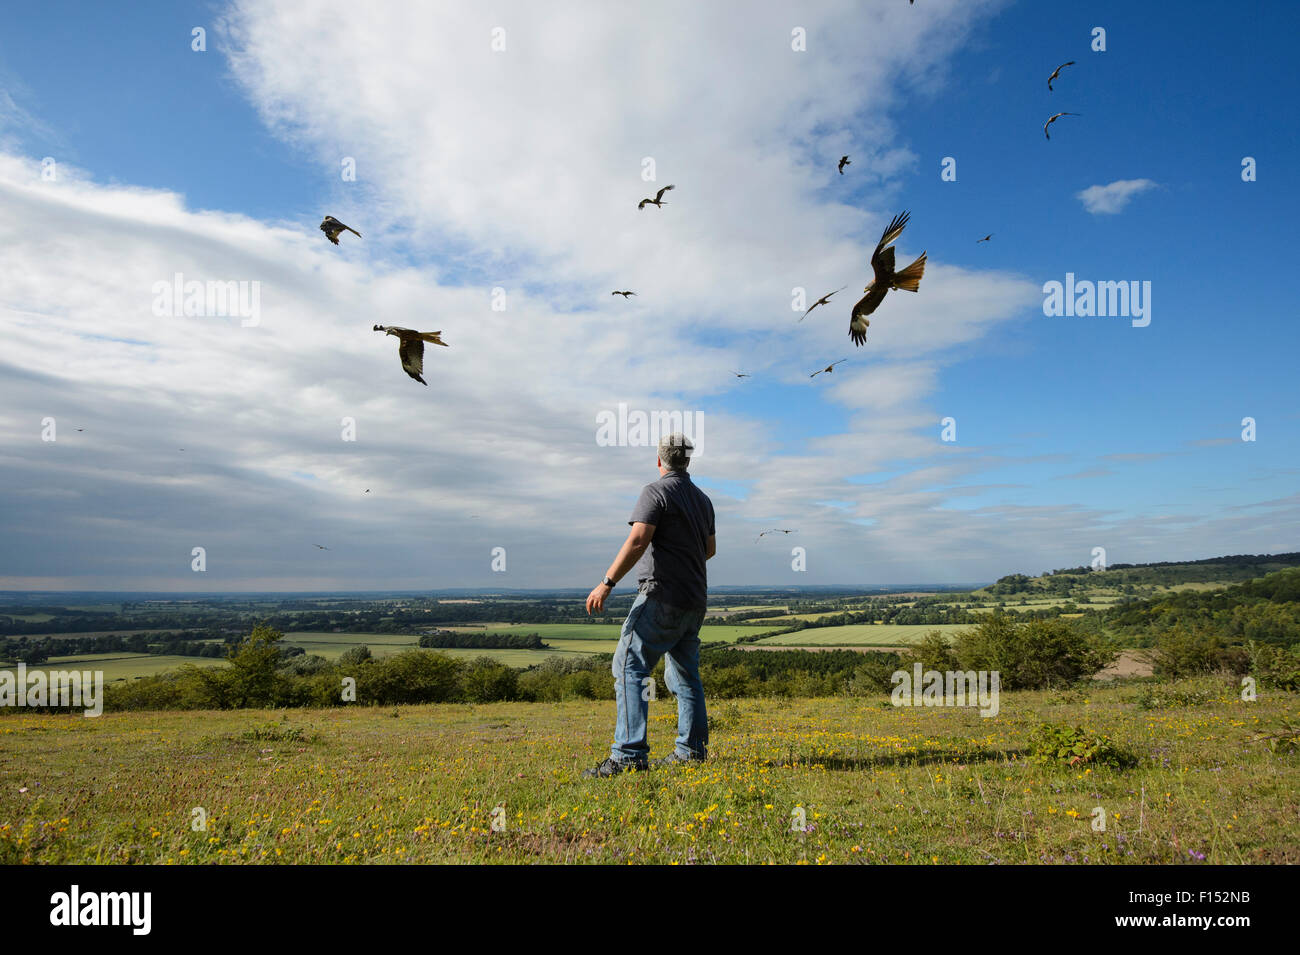 Red kites (Milvus milvus) in flight, circling over man on Watlington Hill where they are being fed, Chilterns, England, July 2014. Model released. Stock Photo